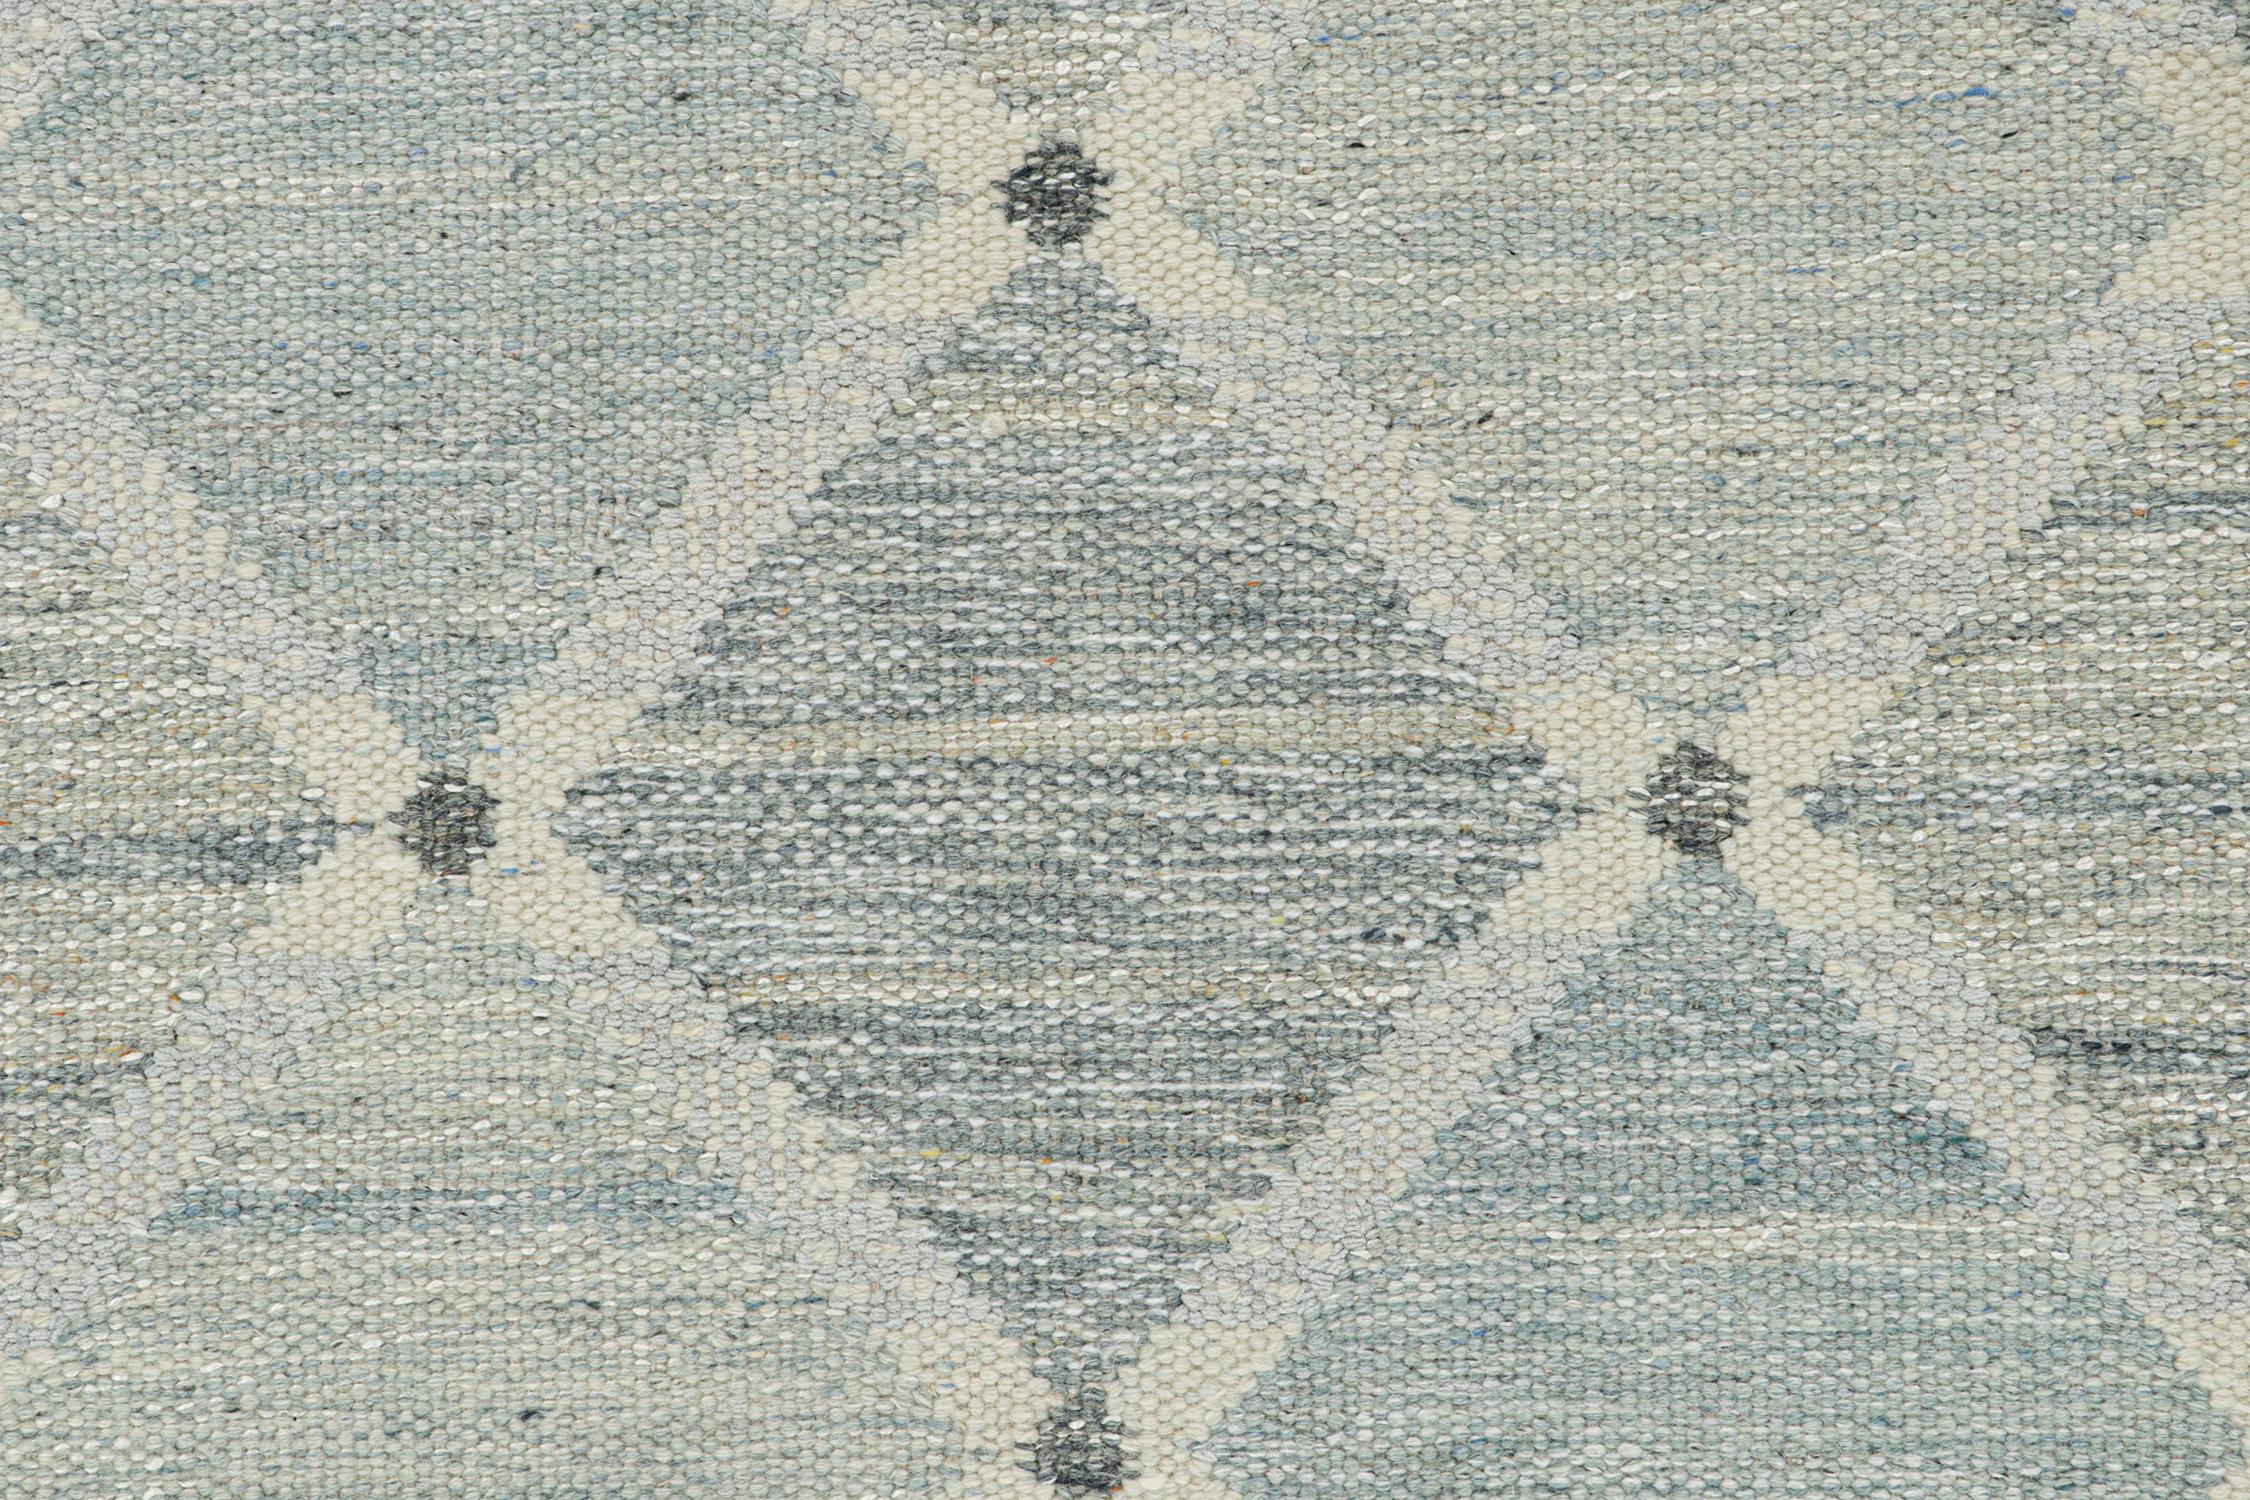 Rug & Kilim’s Scandinavian Style Kilim Runner with Blue Diamond Lattice Patterns In New Condition For Sale In Long Island City, NY